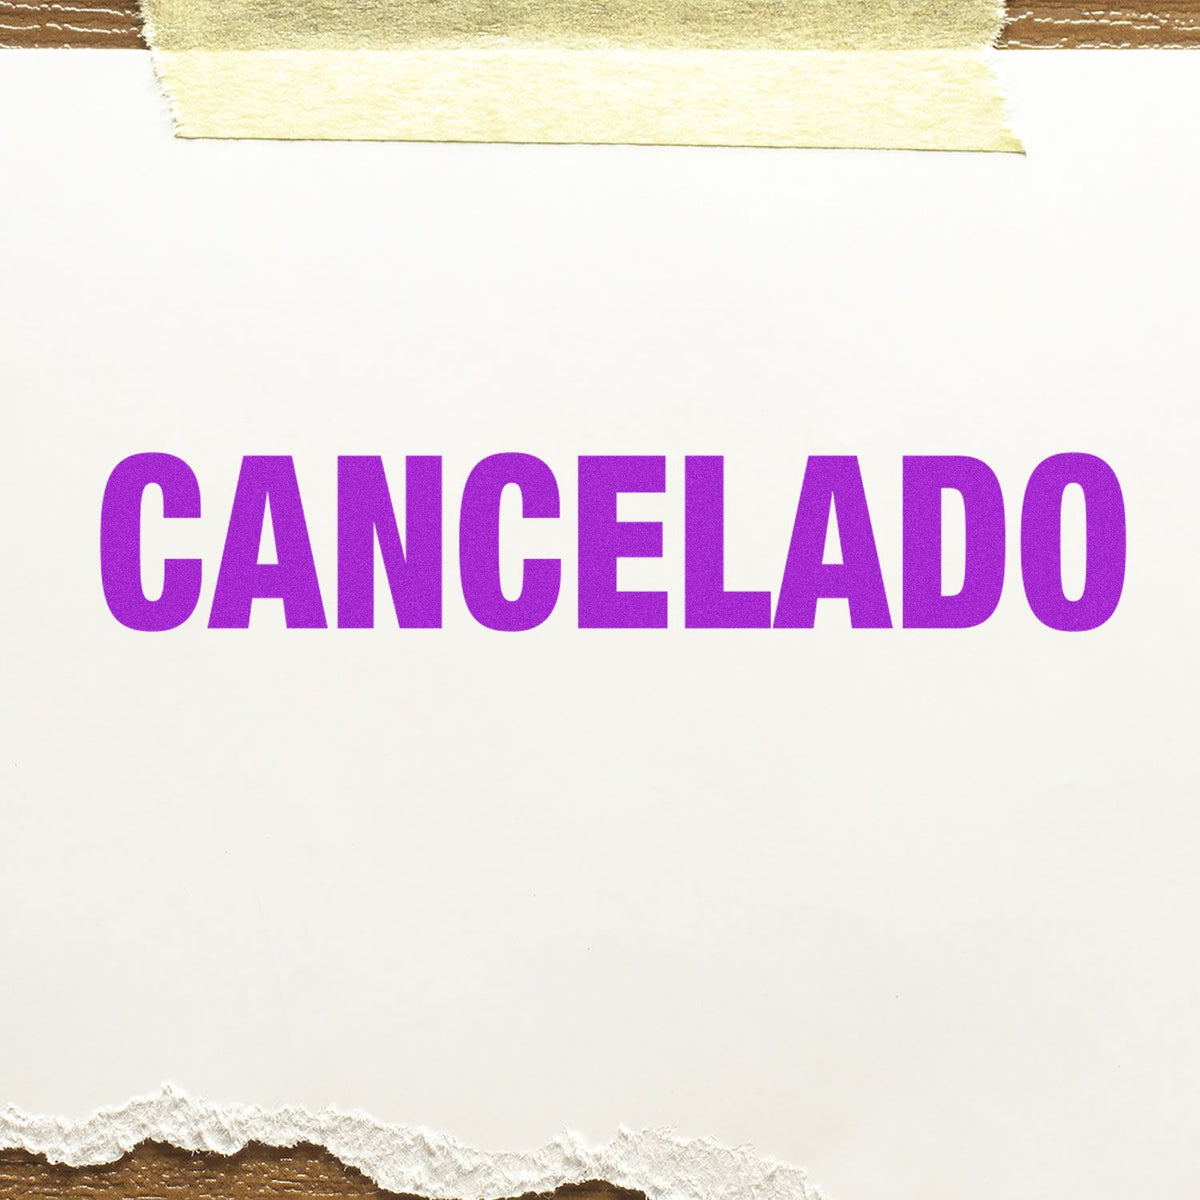 Large Self-Inking Cancelado Stamp In Use